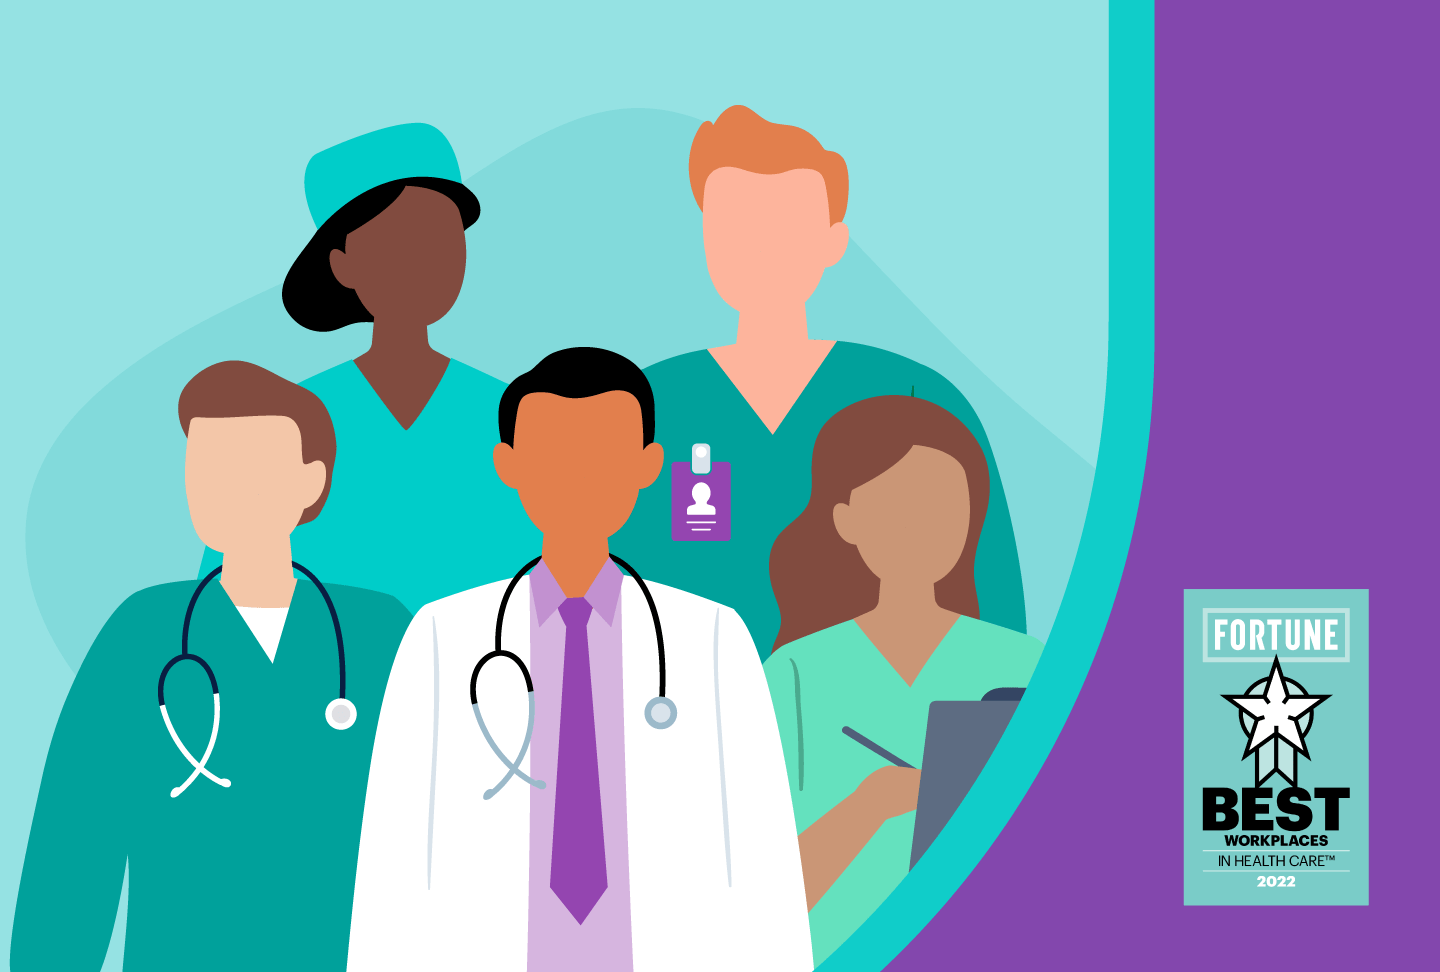 Illustration of medical providers, Fortune Best Workplaces in Health Care logo